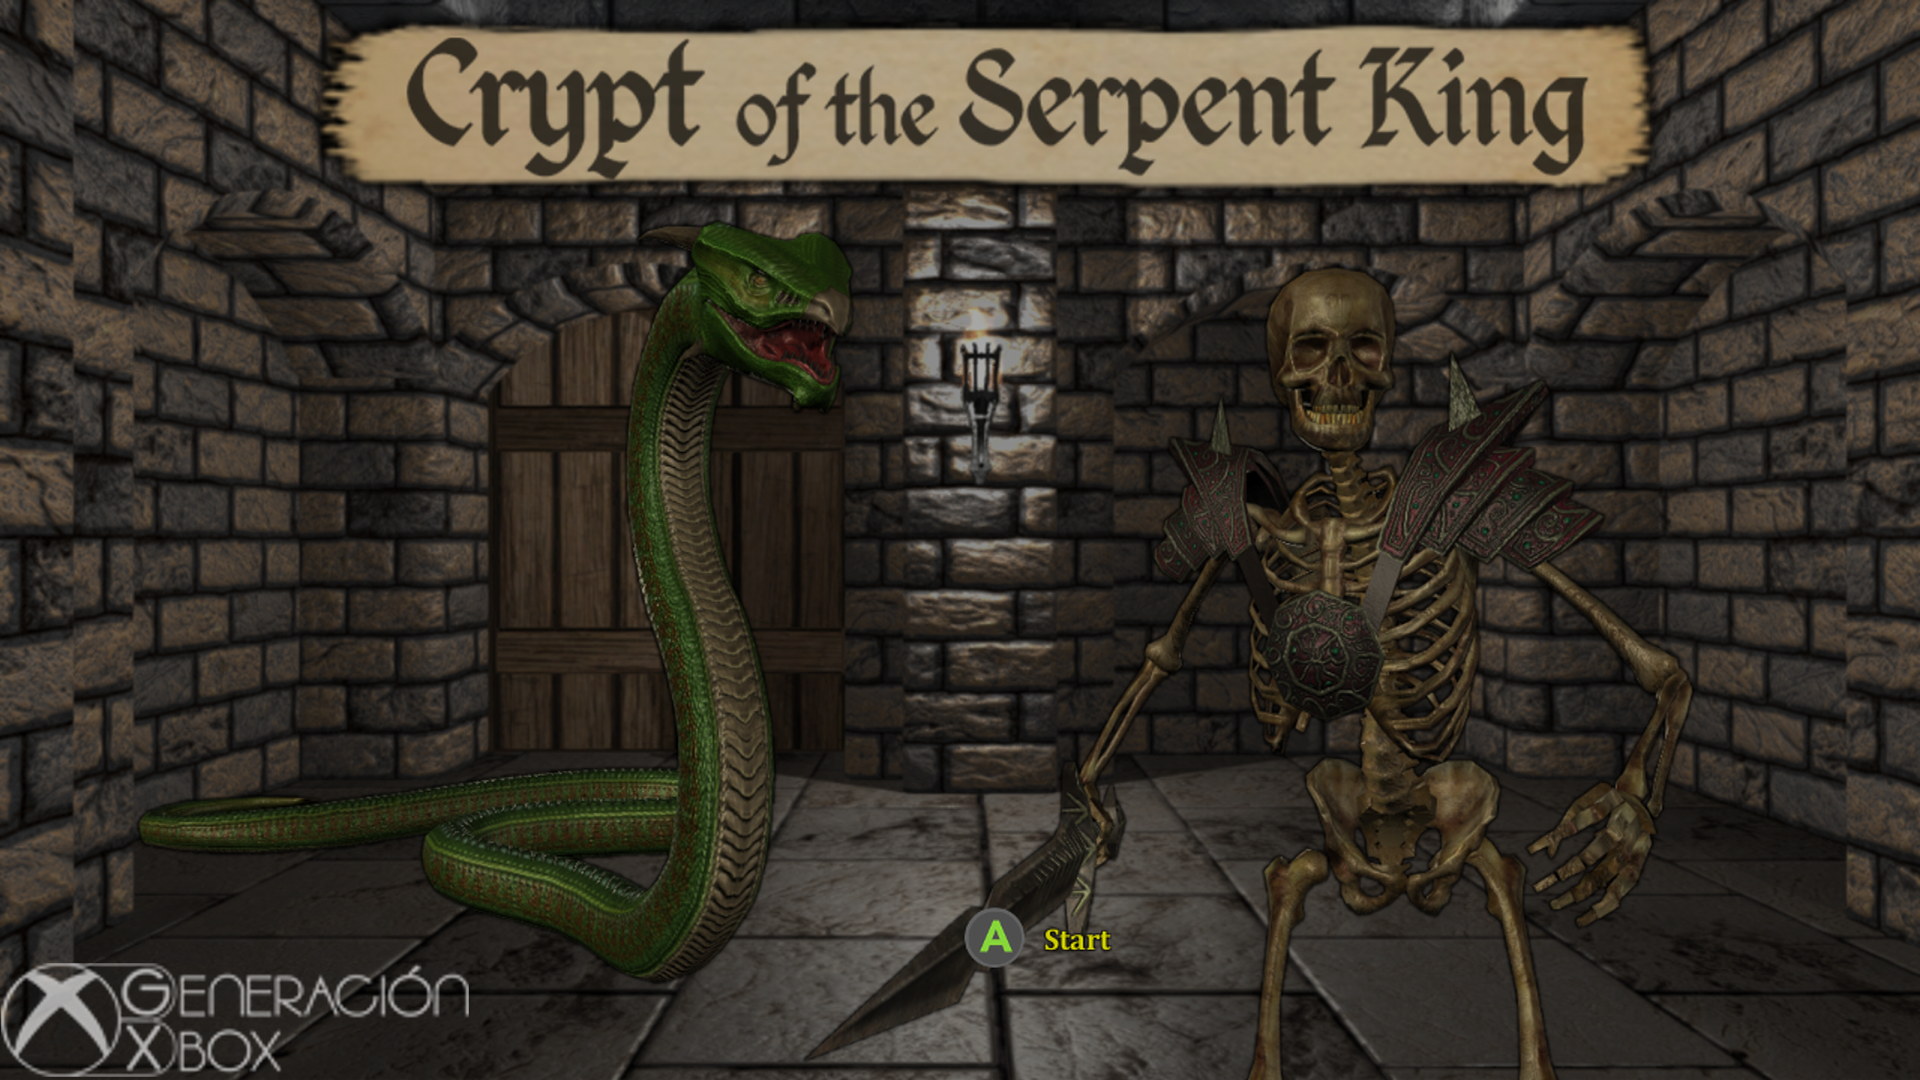 Crypt of the Serpent King